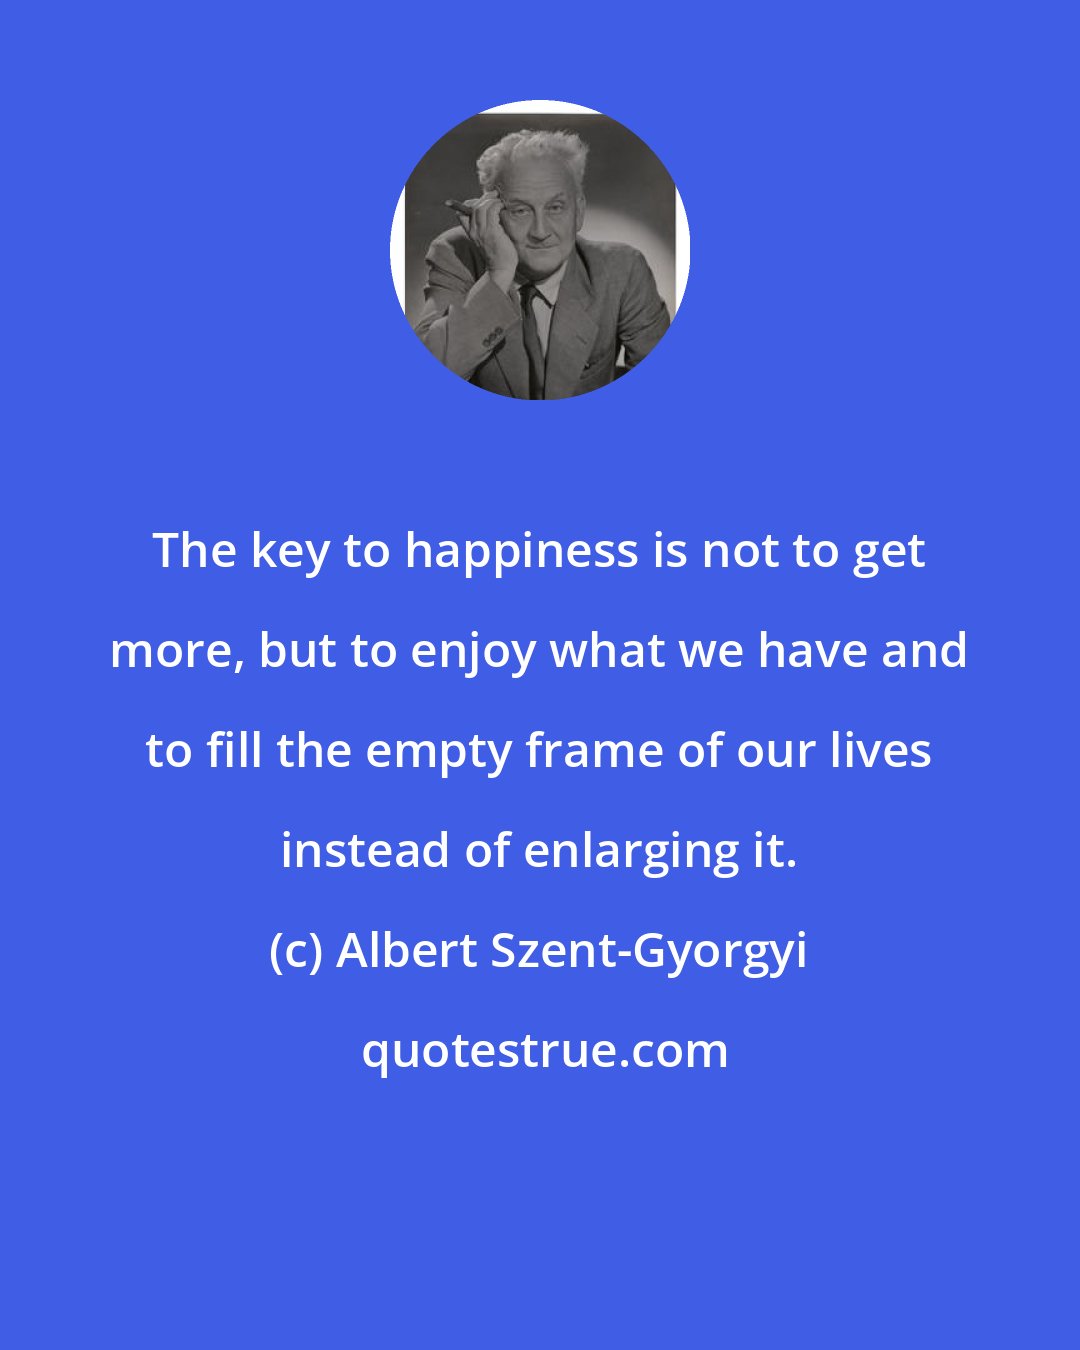 Albert Szent-Gyorgyi: The key to happiness is not to get more, but to enjoy what we have and to fill the empty frame of our lives instead of enlarging it.